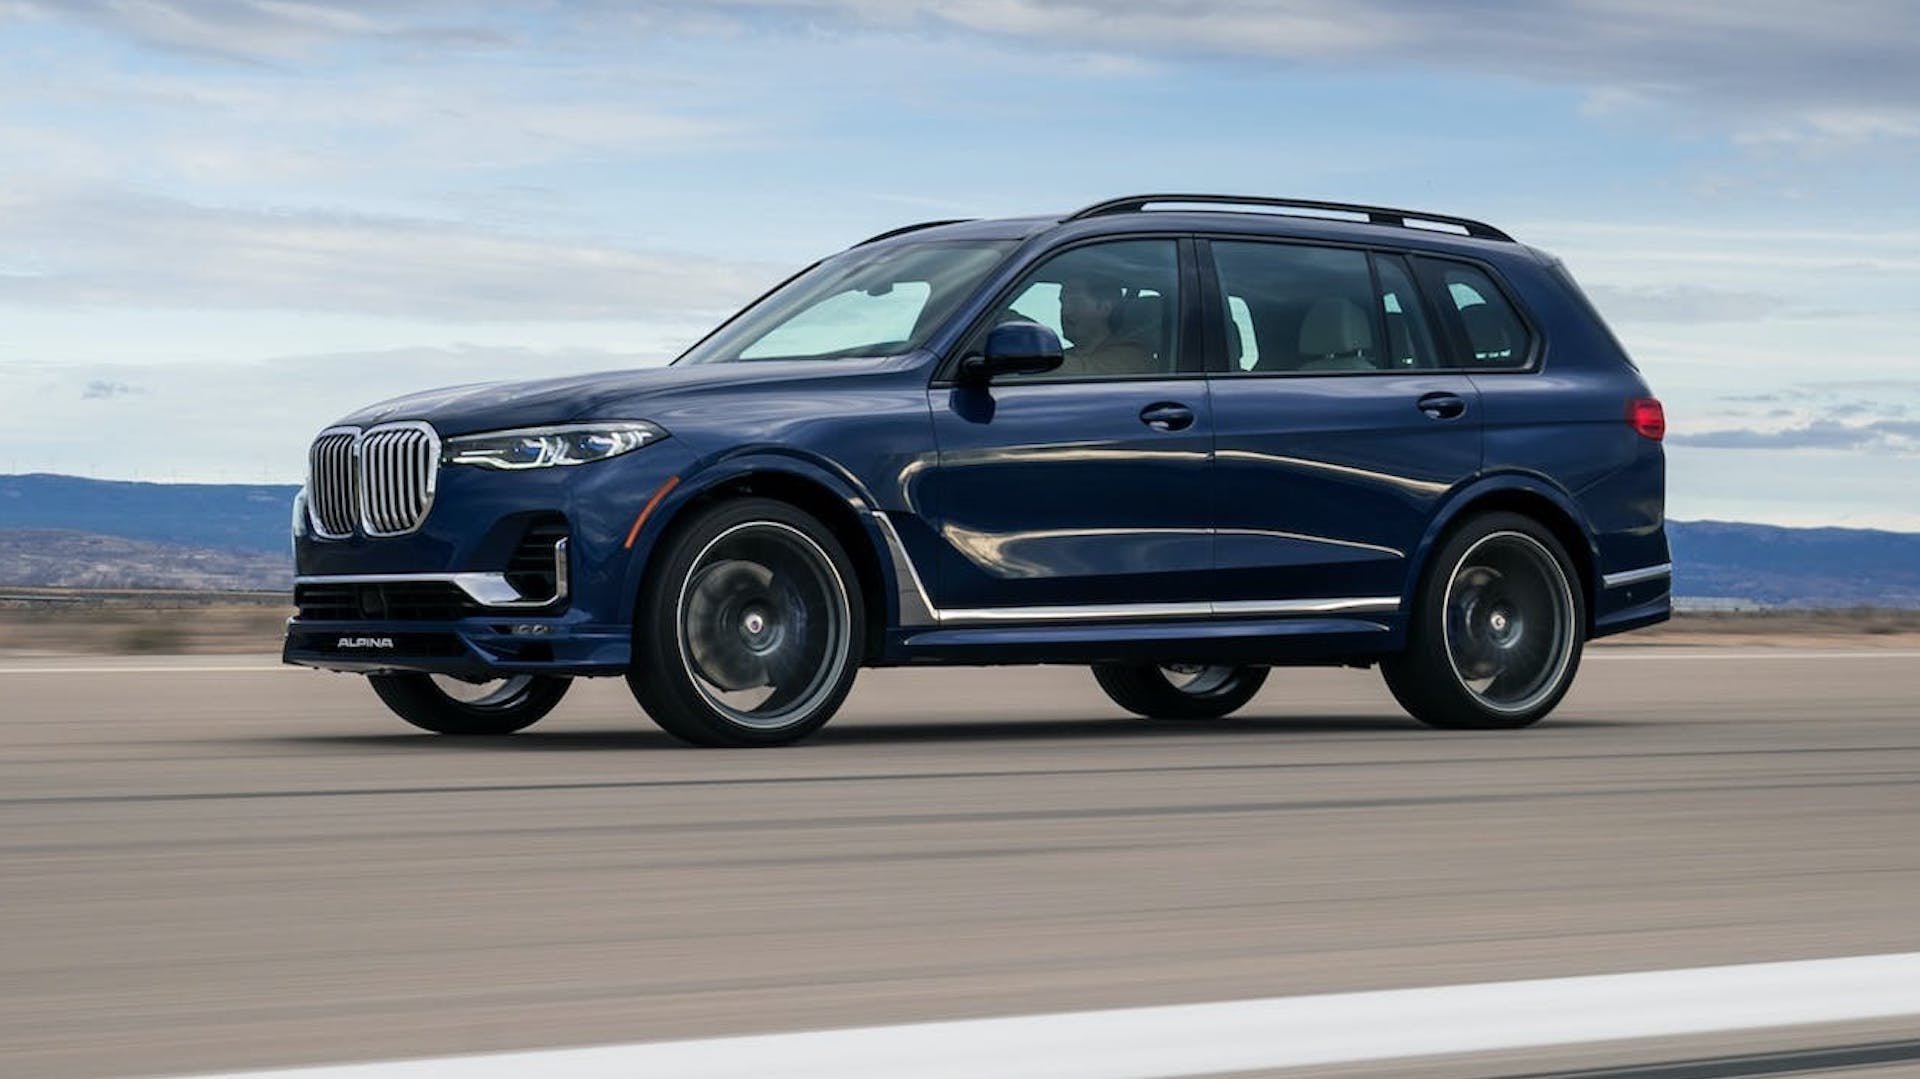 The 2021 Alpina XB7 Gets 612 HP and a $141,300 Price Tag to Boost BMW’s